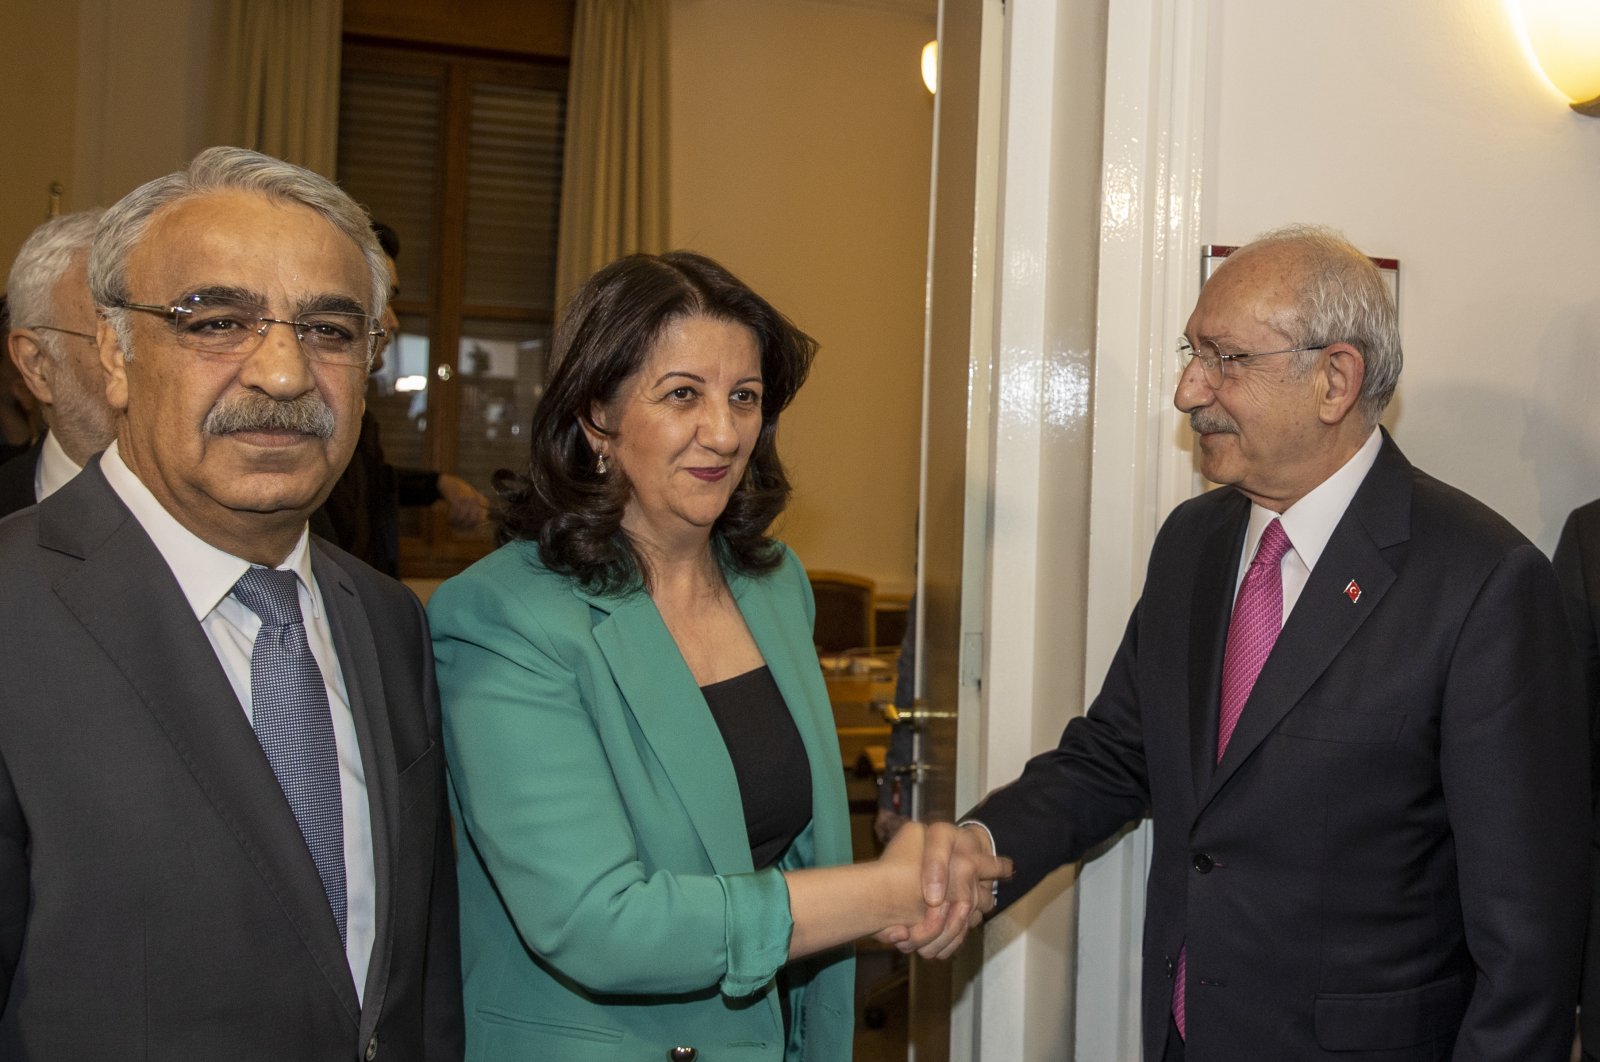 The Peoples’ Democratic Party (HDP) Co-Chairs Pervin Buldan (C) and Mithat Sancar (L) welcome the main opposition Republican People&#039;s Party (CHP) Chair and presidential candidate Kemal Kılıçdaroğlu (R) for a meeting at Parliament, Ankara, Türkiye, March 20, 2023. (AA Photo)